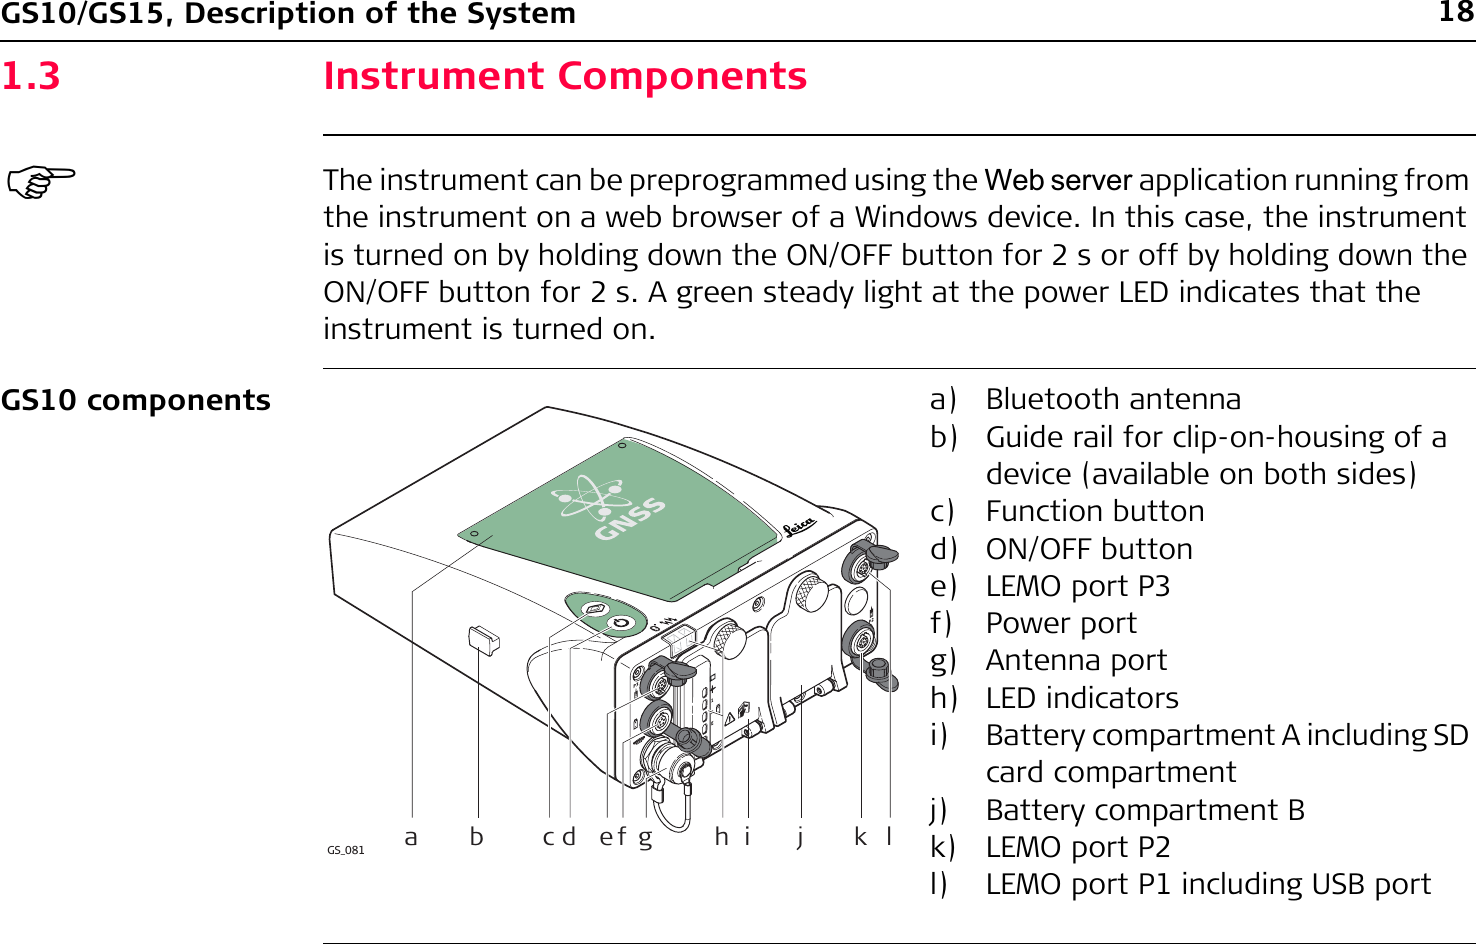 18GS10/GS15, Description of the System1.3 Instrument Components)The instrument can be preprogrammed using the Web server application running from the instrument on a web browser of a Windows device. In this case, the instrument is turned on by holding down the ON/OFF button for 2 s or off by holding down the ON/OFF button for 2 s. A green steady light at the power LED indicates that the instrument is turned on.GS10 components a) Bluetooth antennab) Guide rail for clip-on-housing of a device (available on both sides)c) Function buttond) ON/OFF buttone) LEMO port P3f) Power portg) Antenna porth) LED indicatorsi) Battery compartment A including SD card compartmentj) Battery compartment Bk) LEMO port P2l) LEMO port P1 including USB portGS_081 bahijklcd ef g